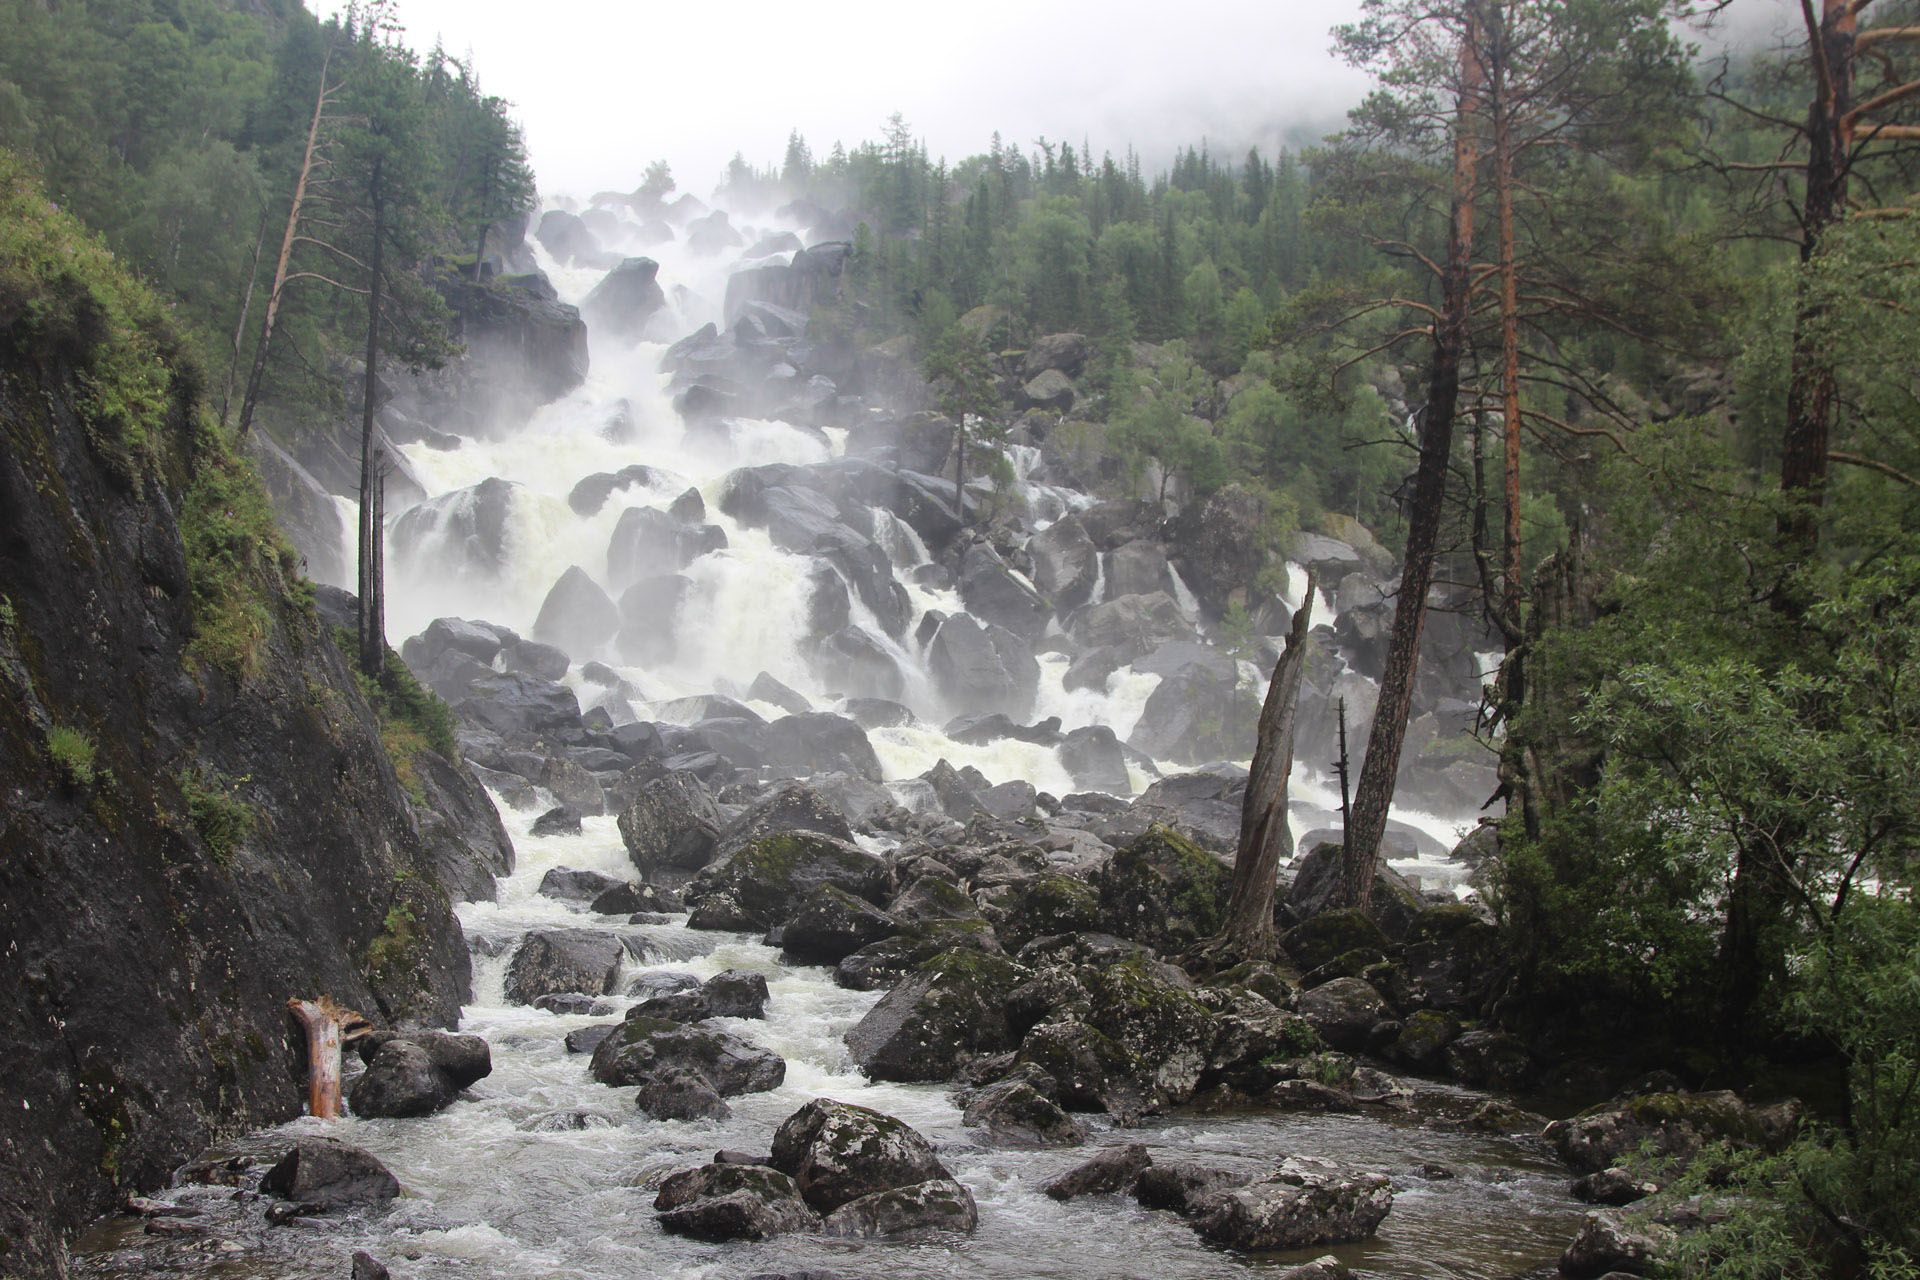 Waterfalls in the Altai